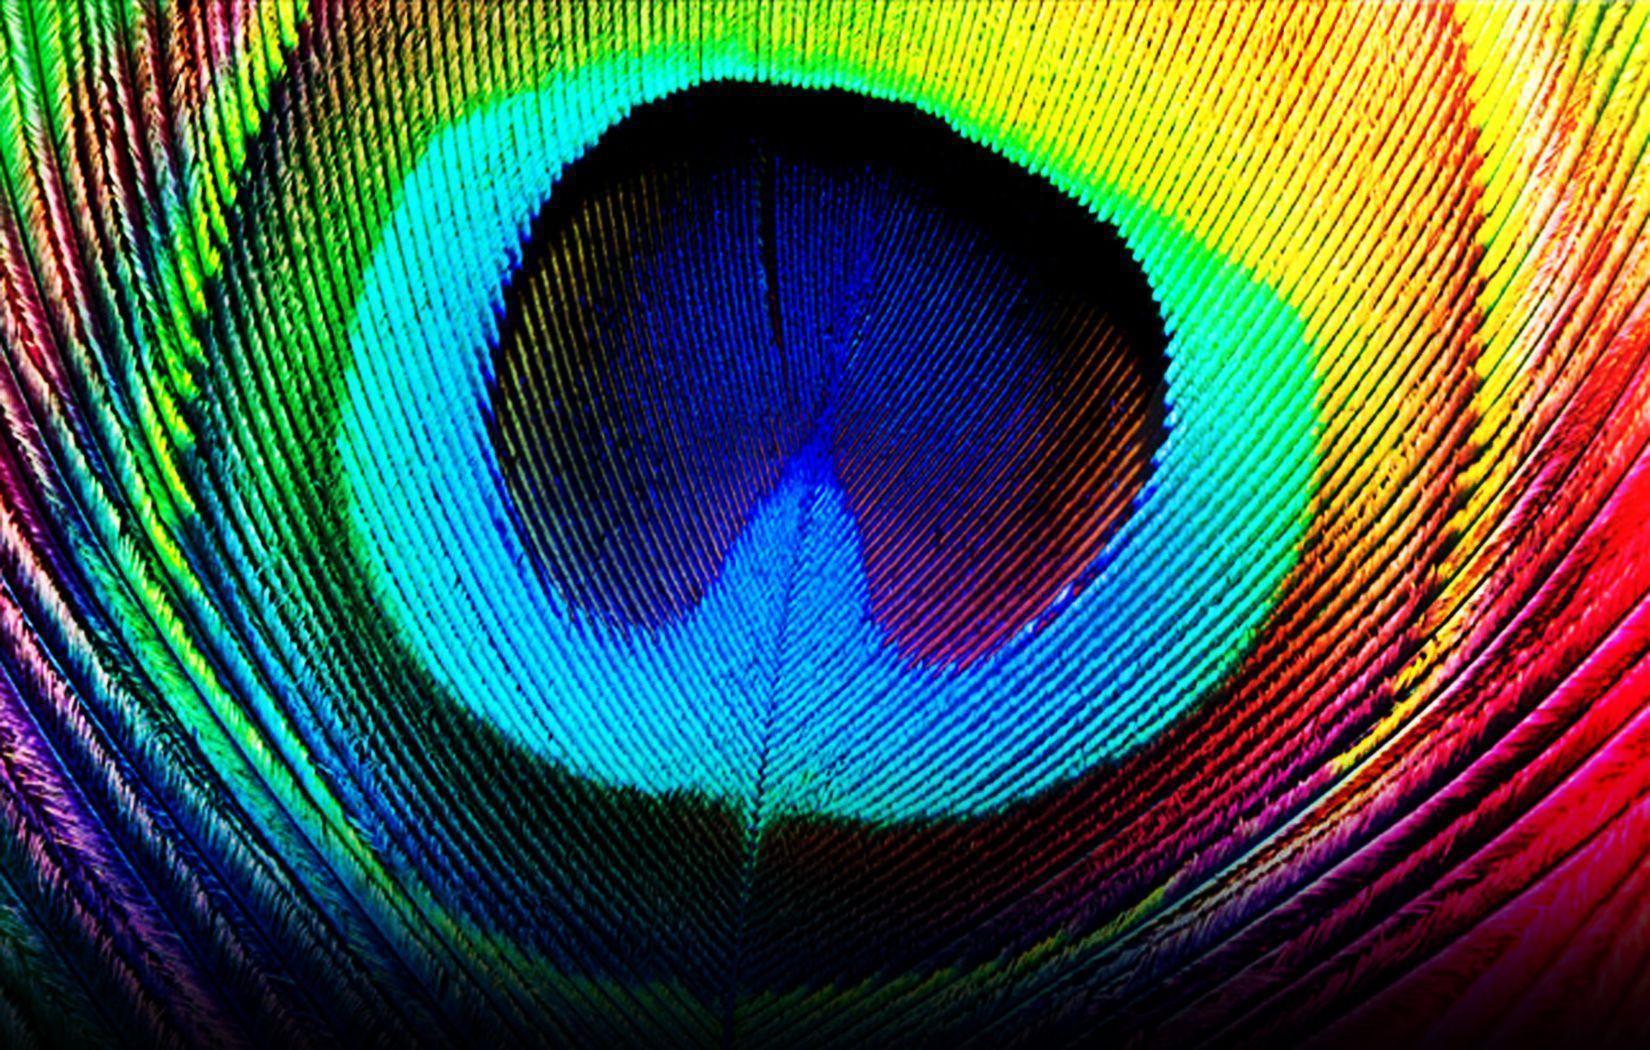 Peacock Feather Wallpaper. HD Wallpaper. Picture. Image